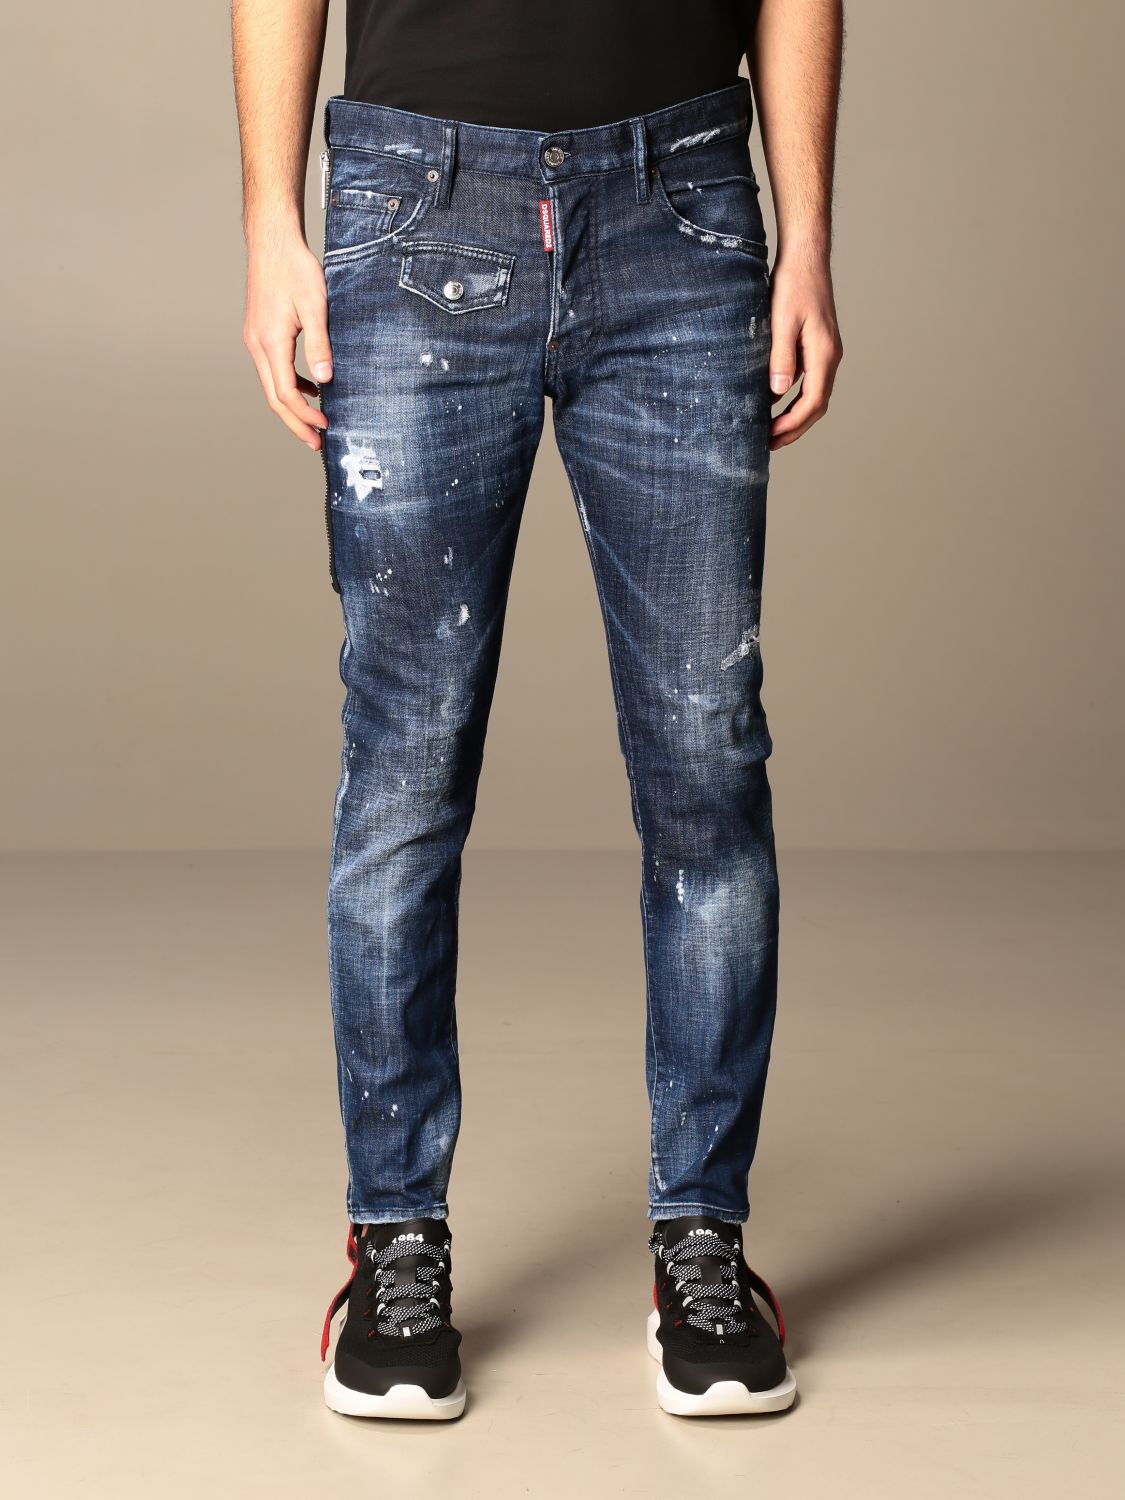 Dsquared2 5-pocket Skater jeans in used denim with rips and zip